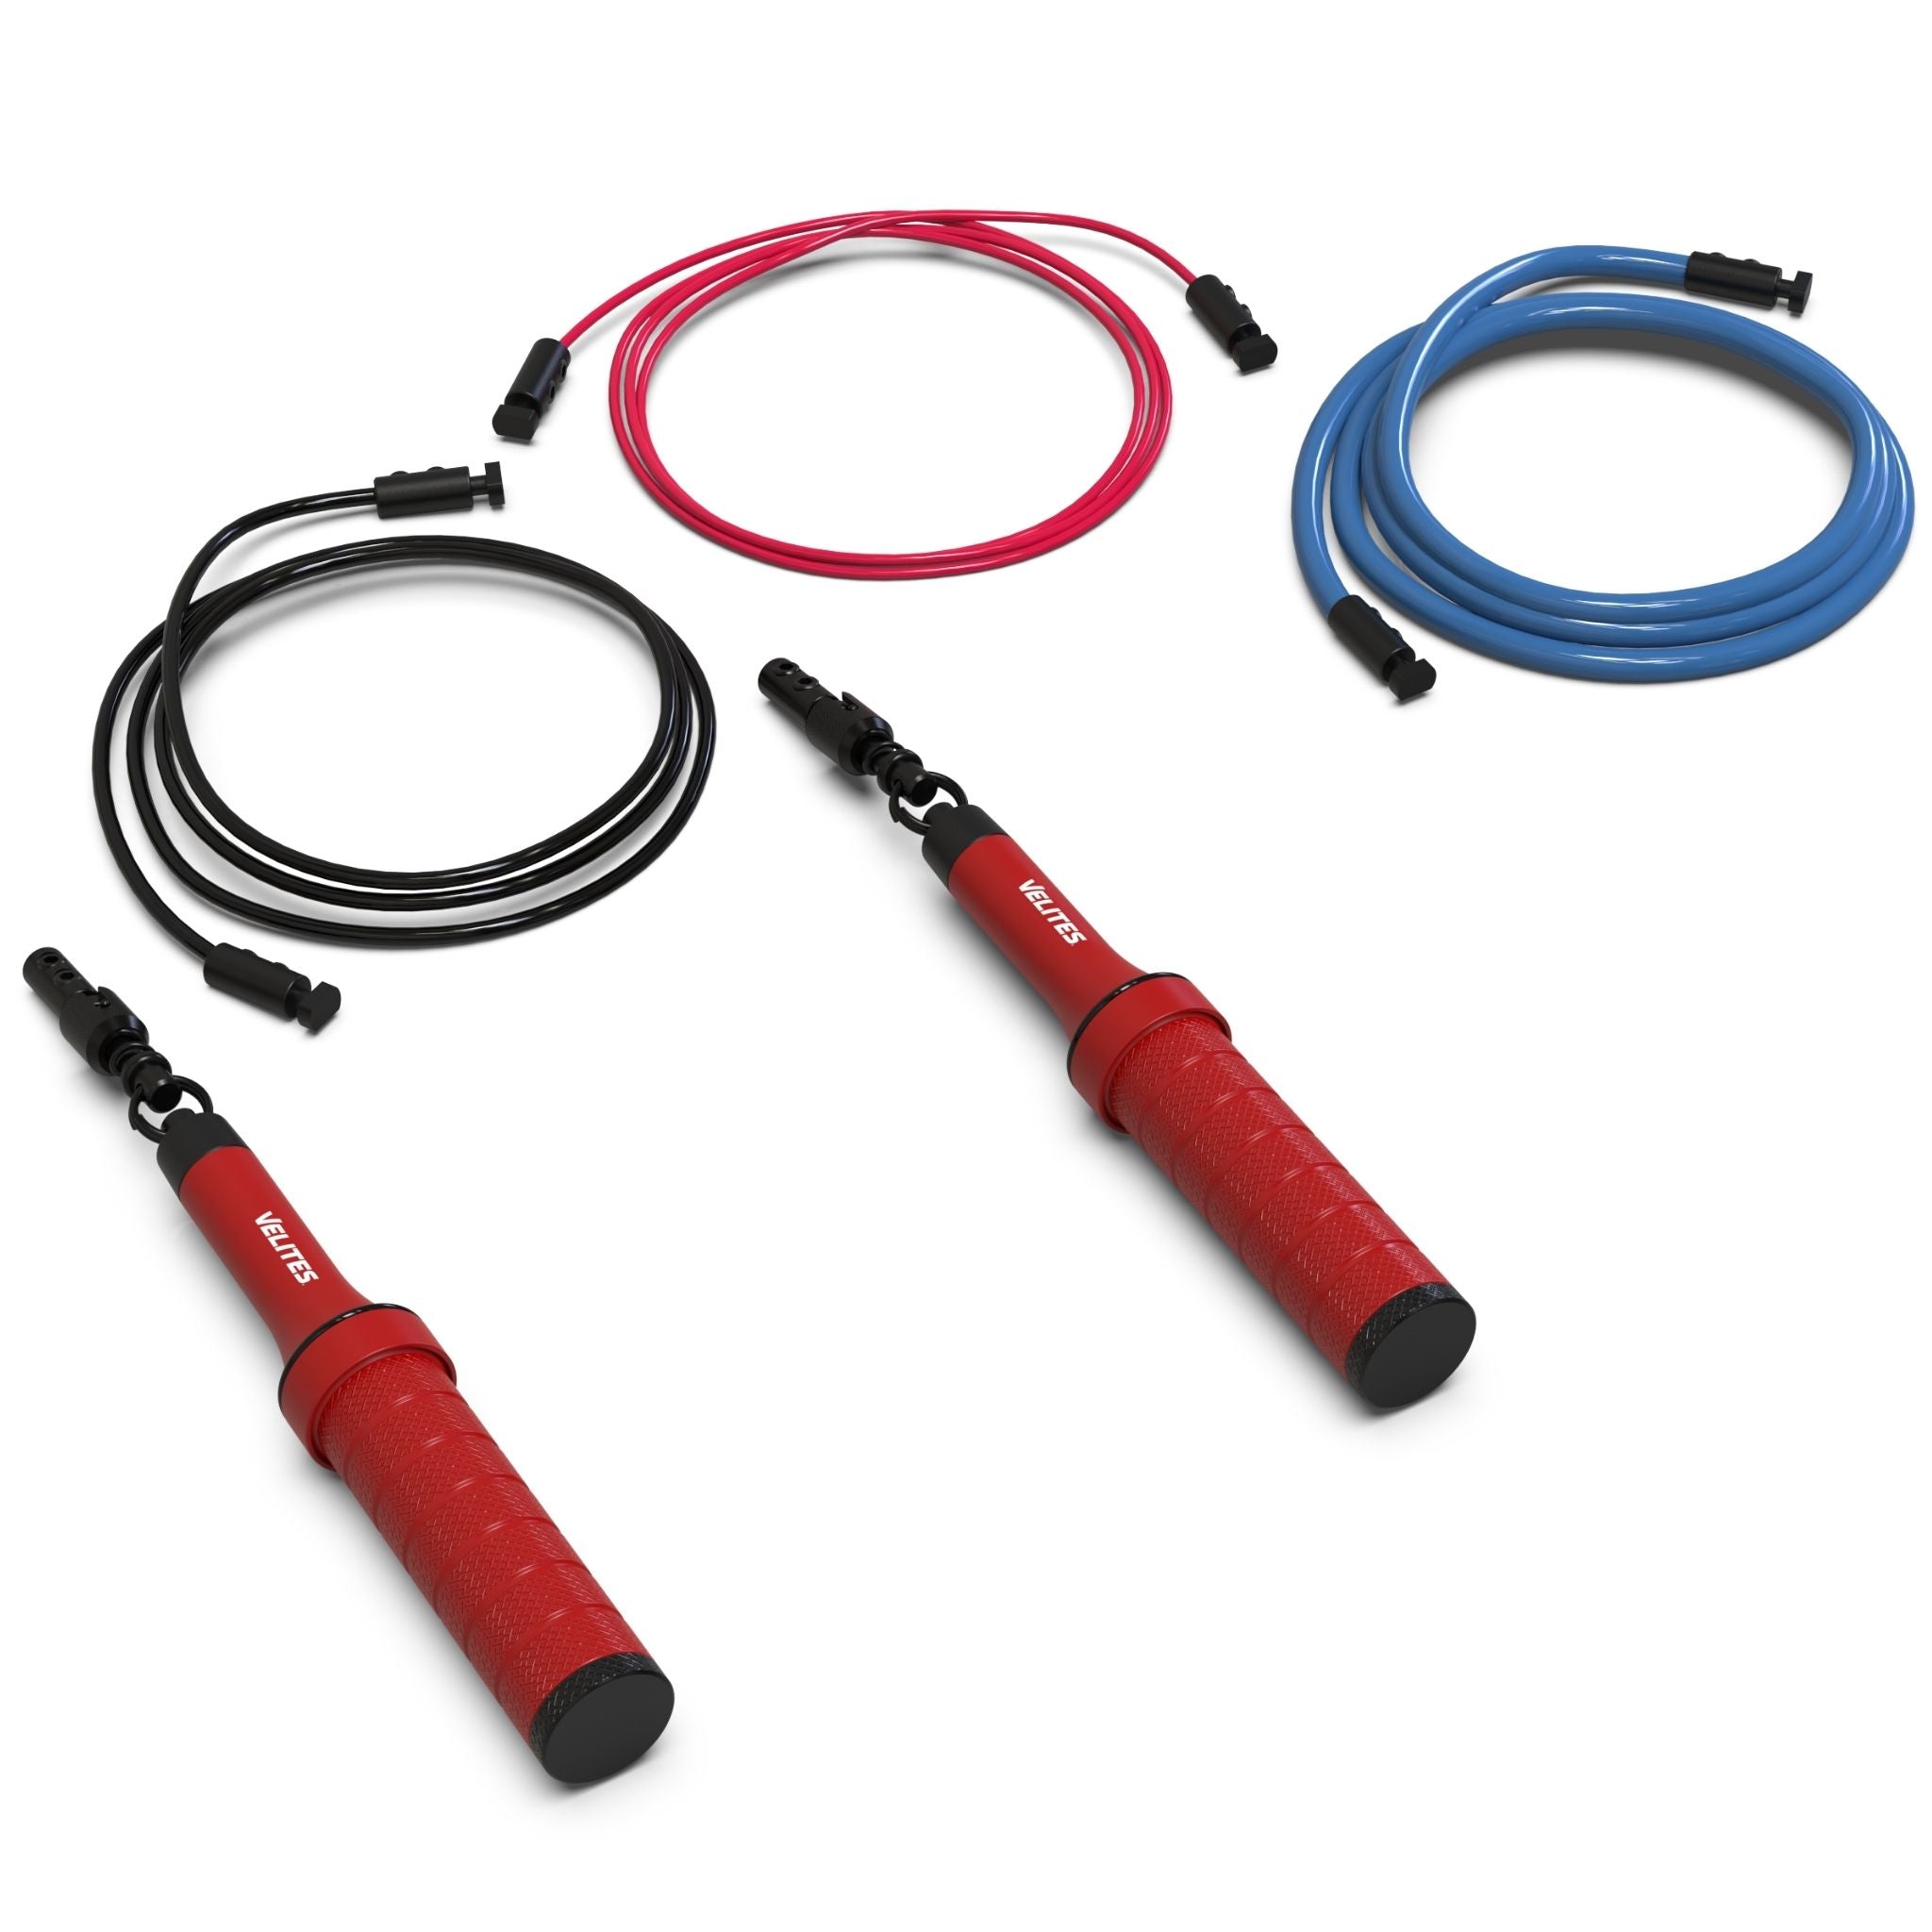 Pack Comba Earth 2.0 Velites + Cables - rojo - 